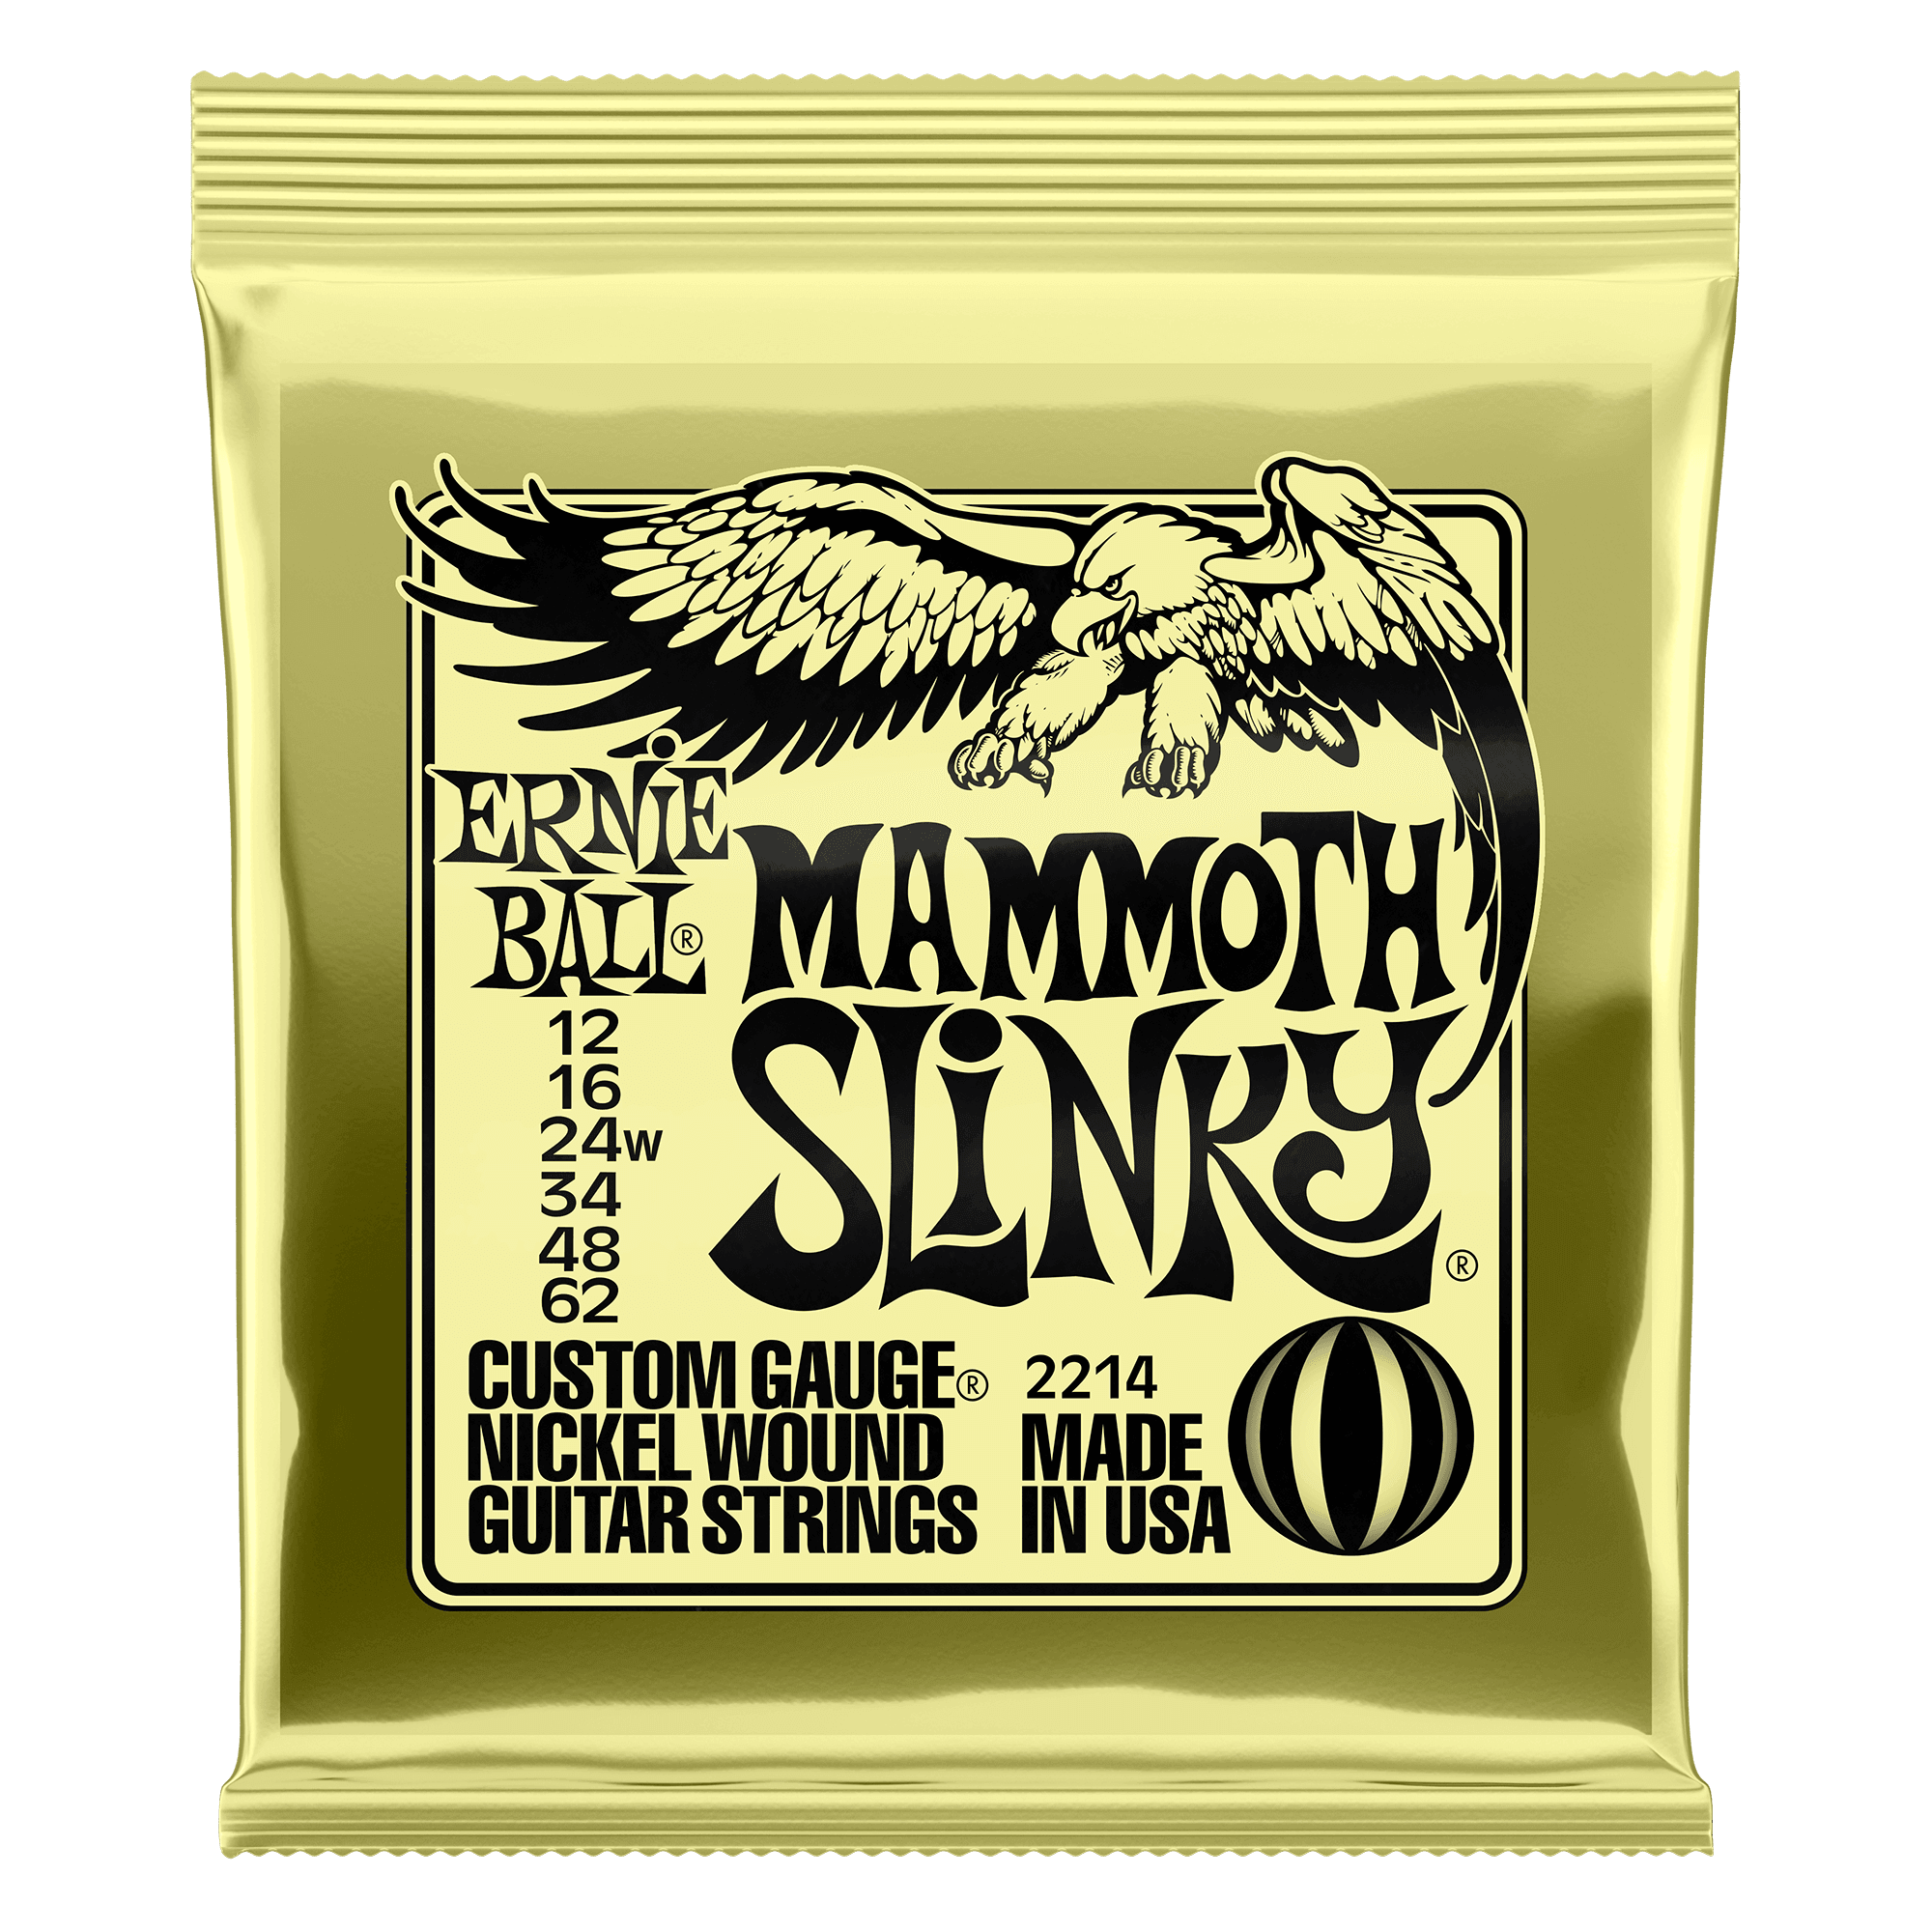 Mammoth Slinky 12/62 Wound 3rd Electric Guitar Strings Set, Nickel Wound, 2214 - Strings - Electric Guitar by Ernie Ball at Muso's Stuff